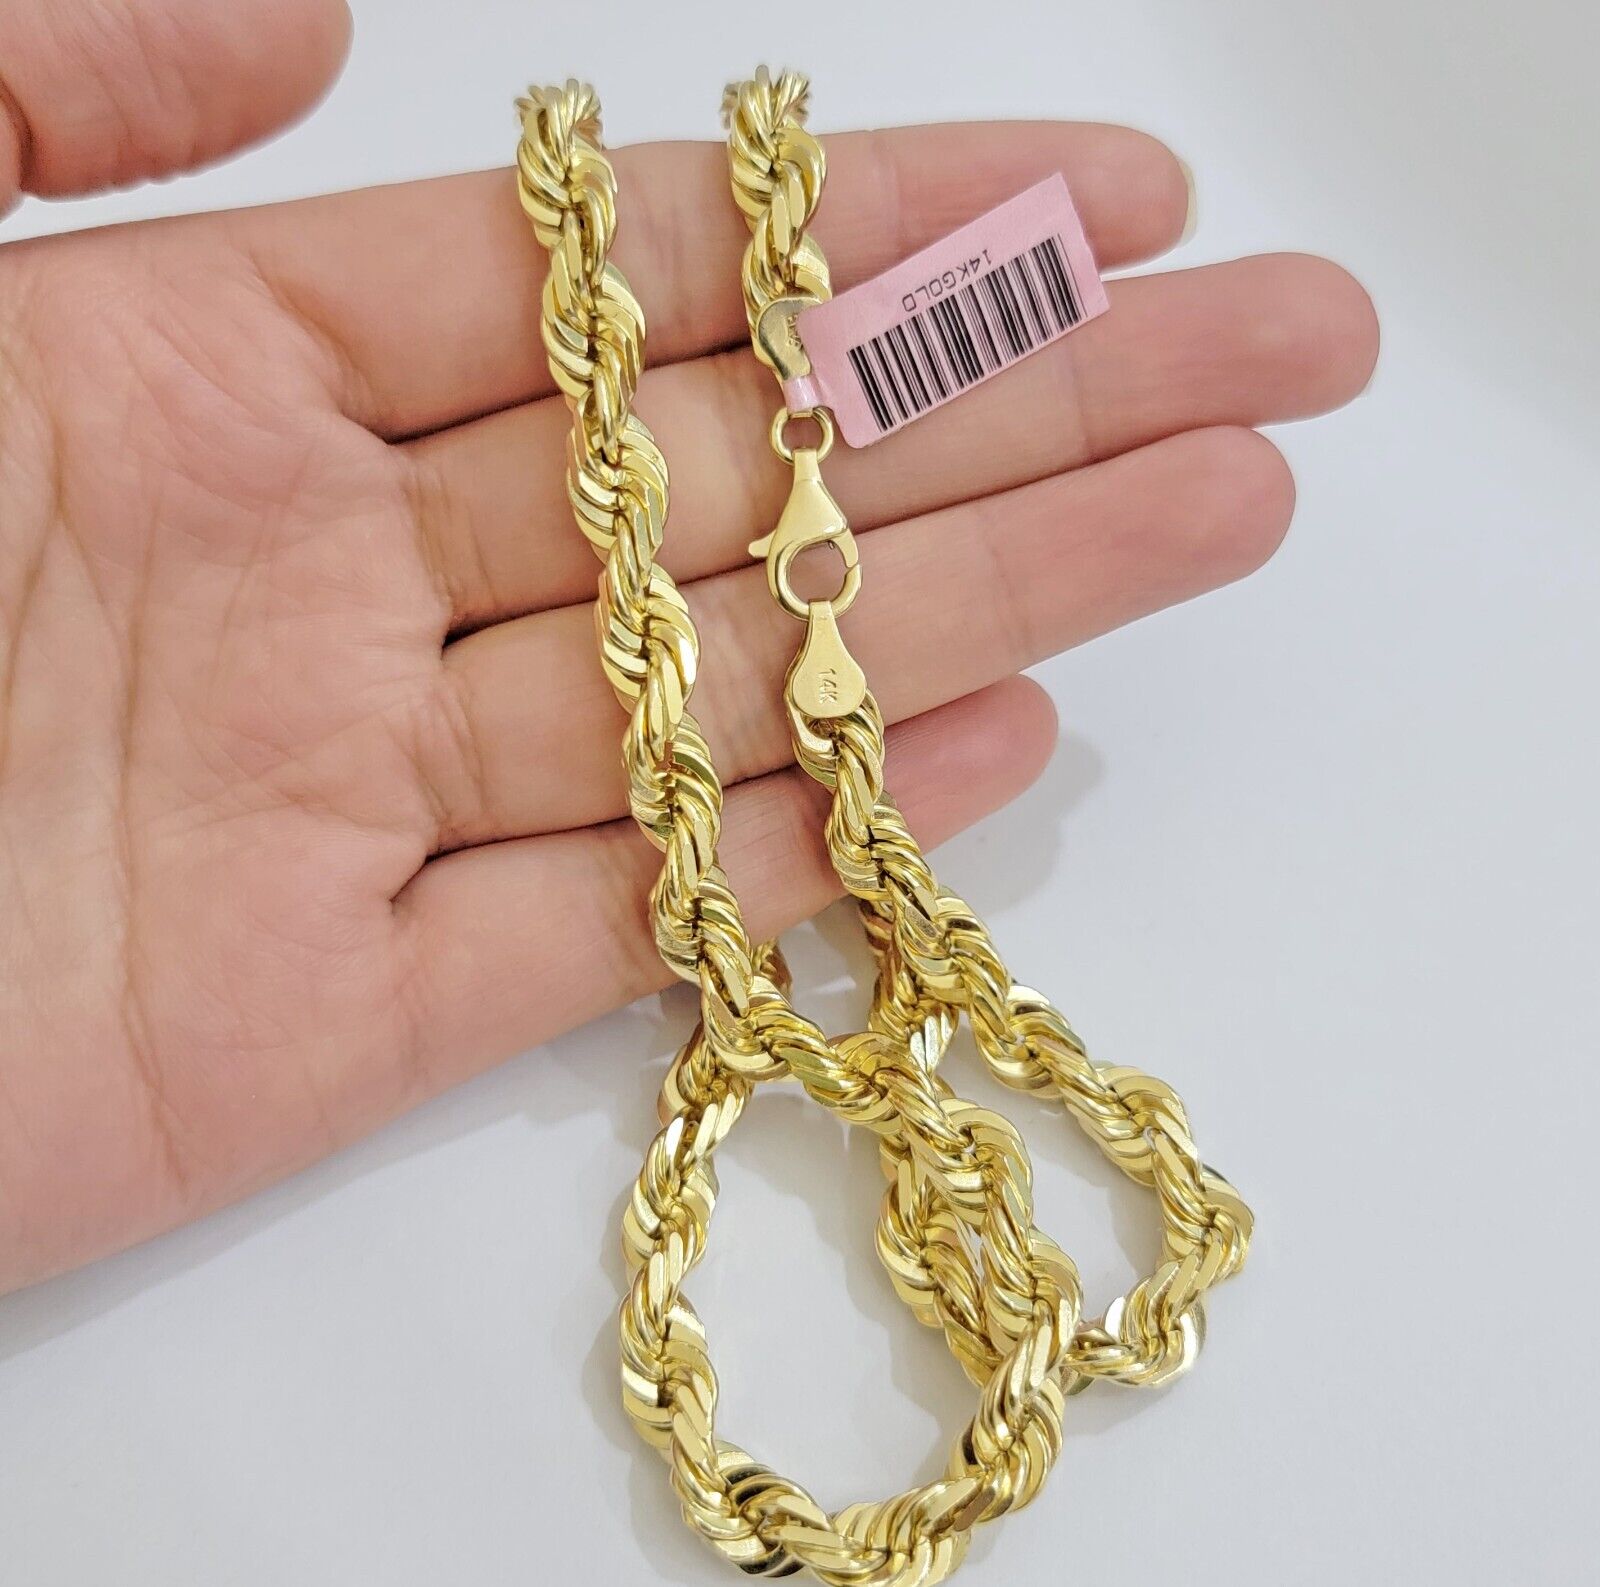 Real 14k Gold Rope Chain Necklace 7mm 24 Inch Diamond Cut SOLID